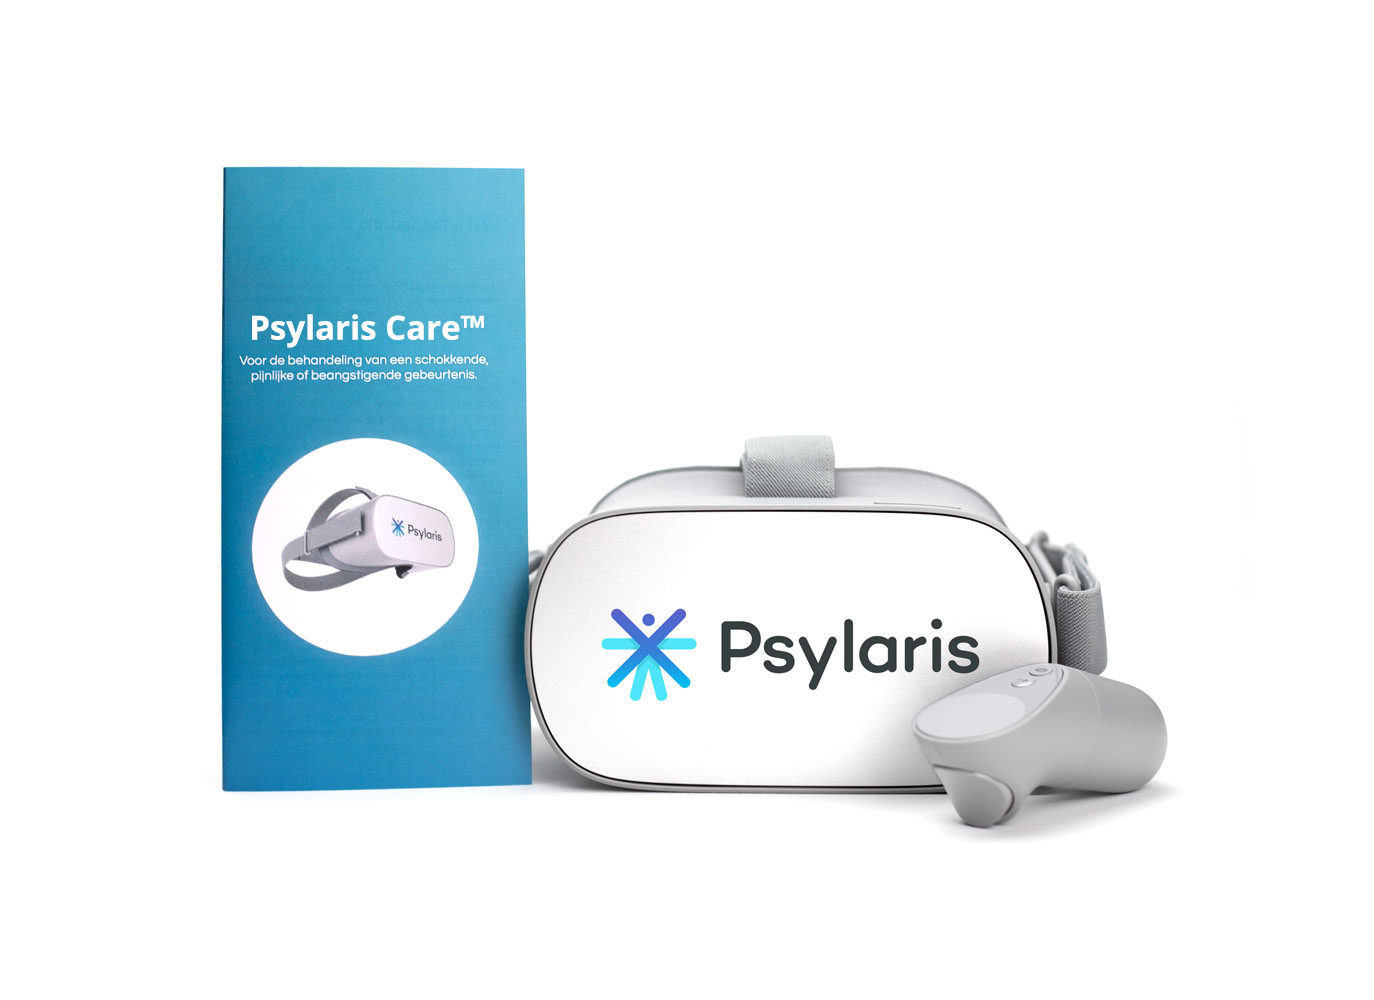 Psylaris Care VR therapy